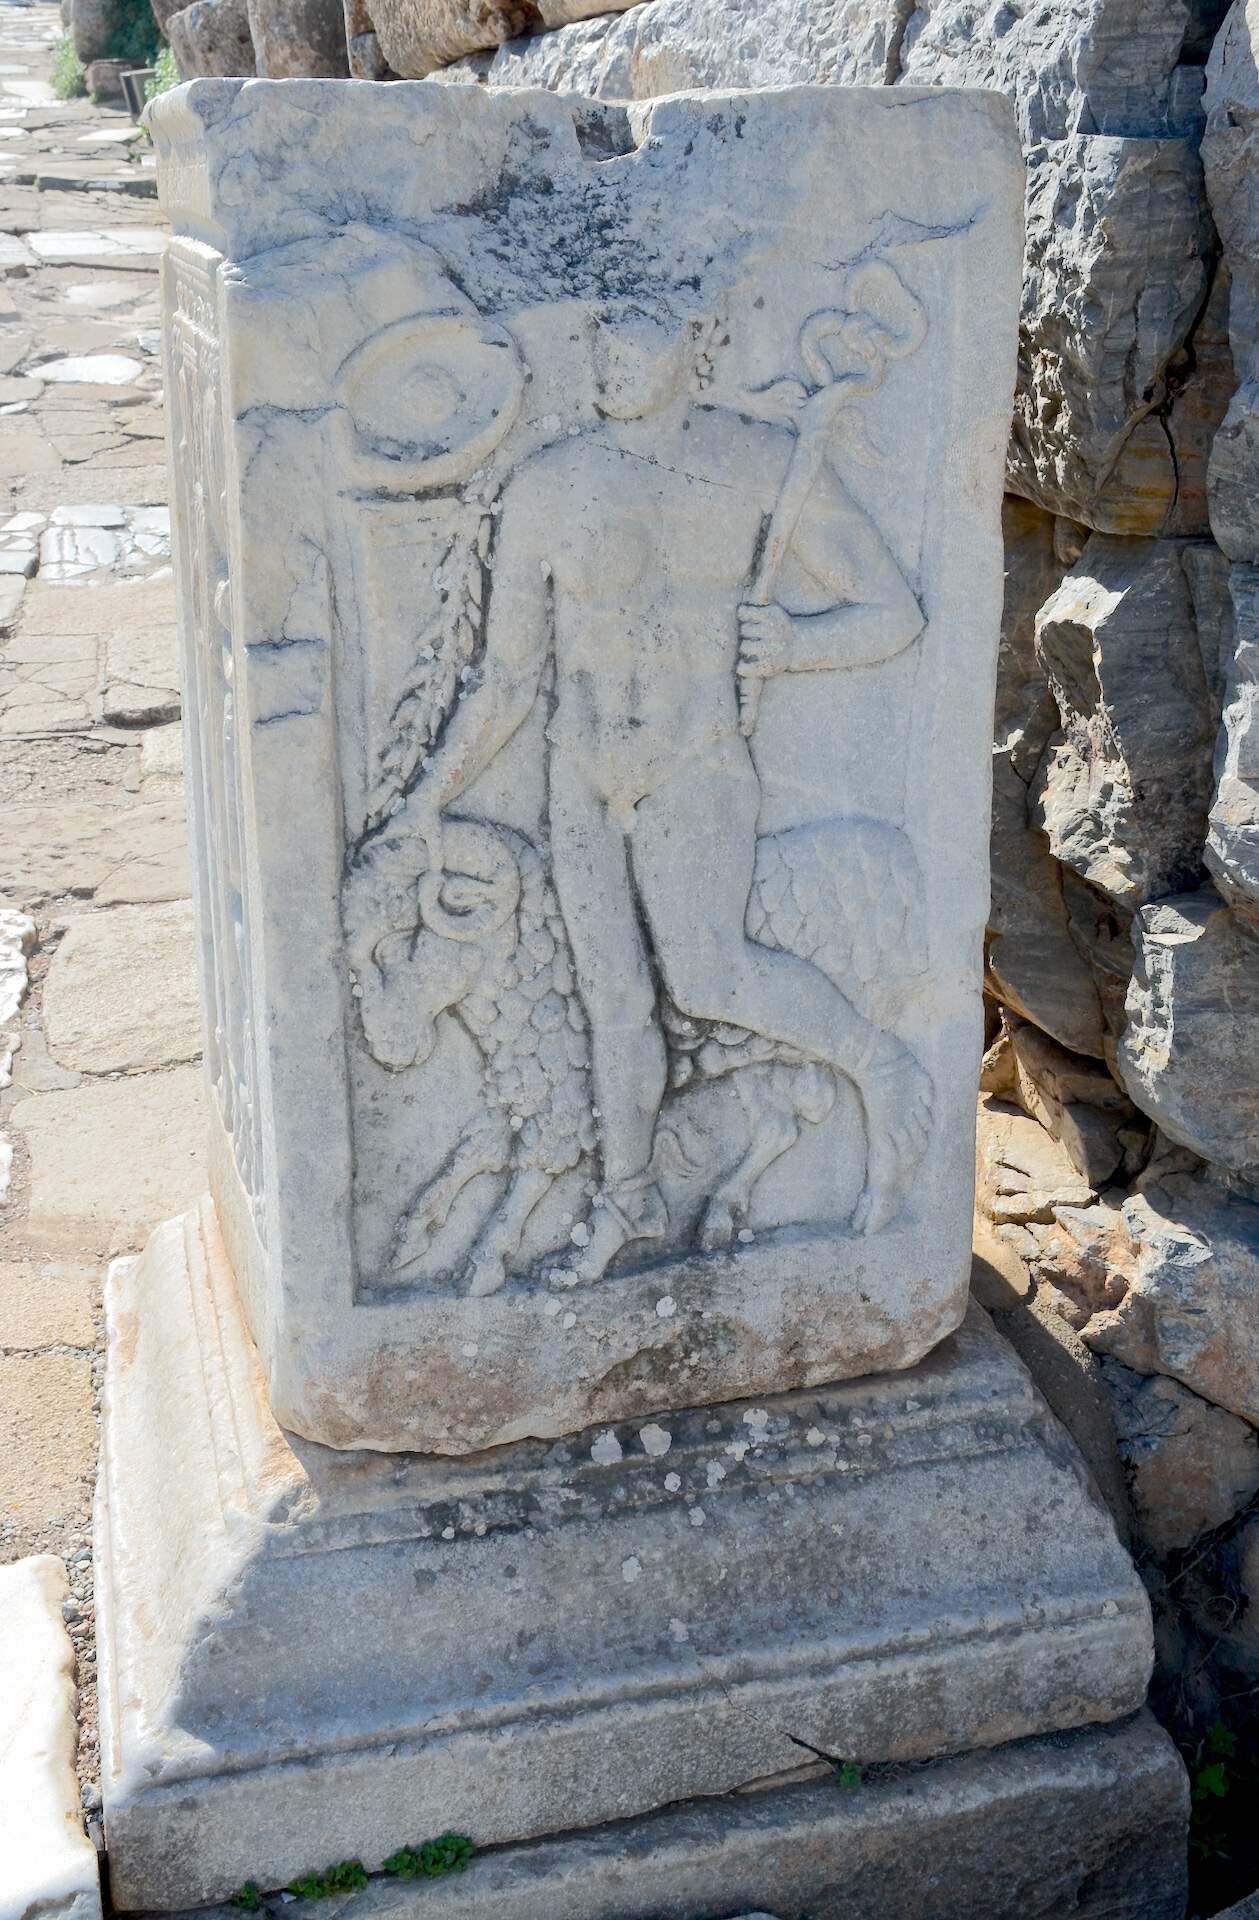 Hermes holding a staff and ram's head on a pillar next to the hospital in Ephesus